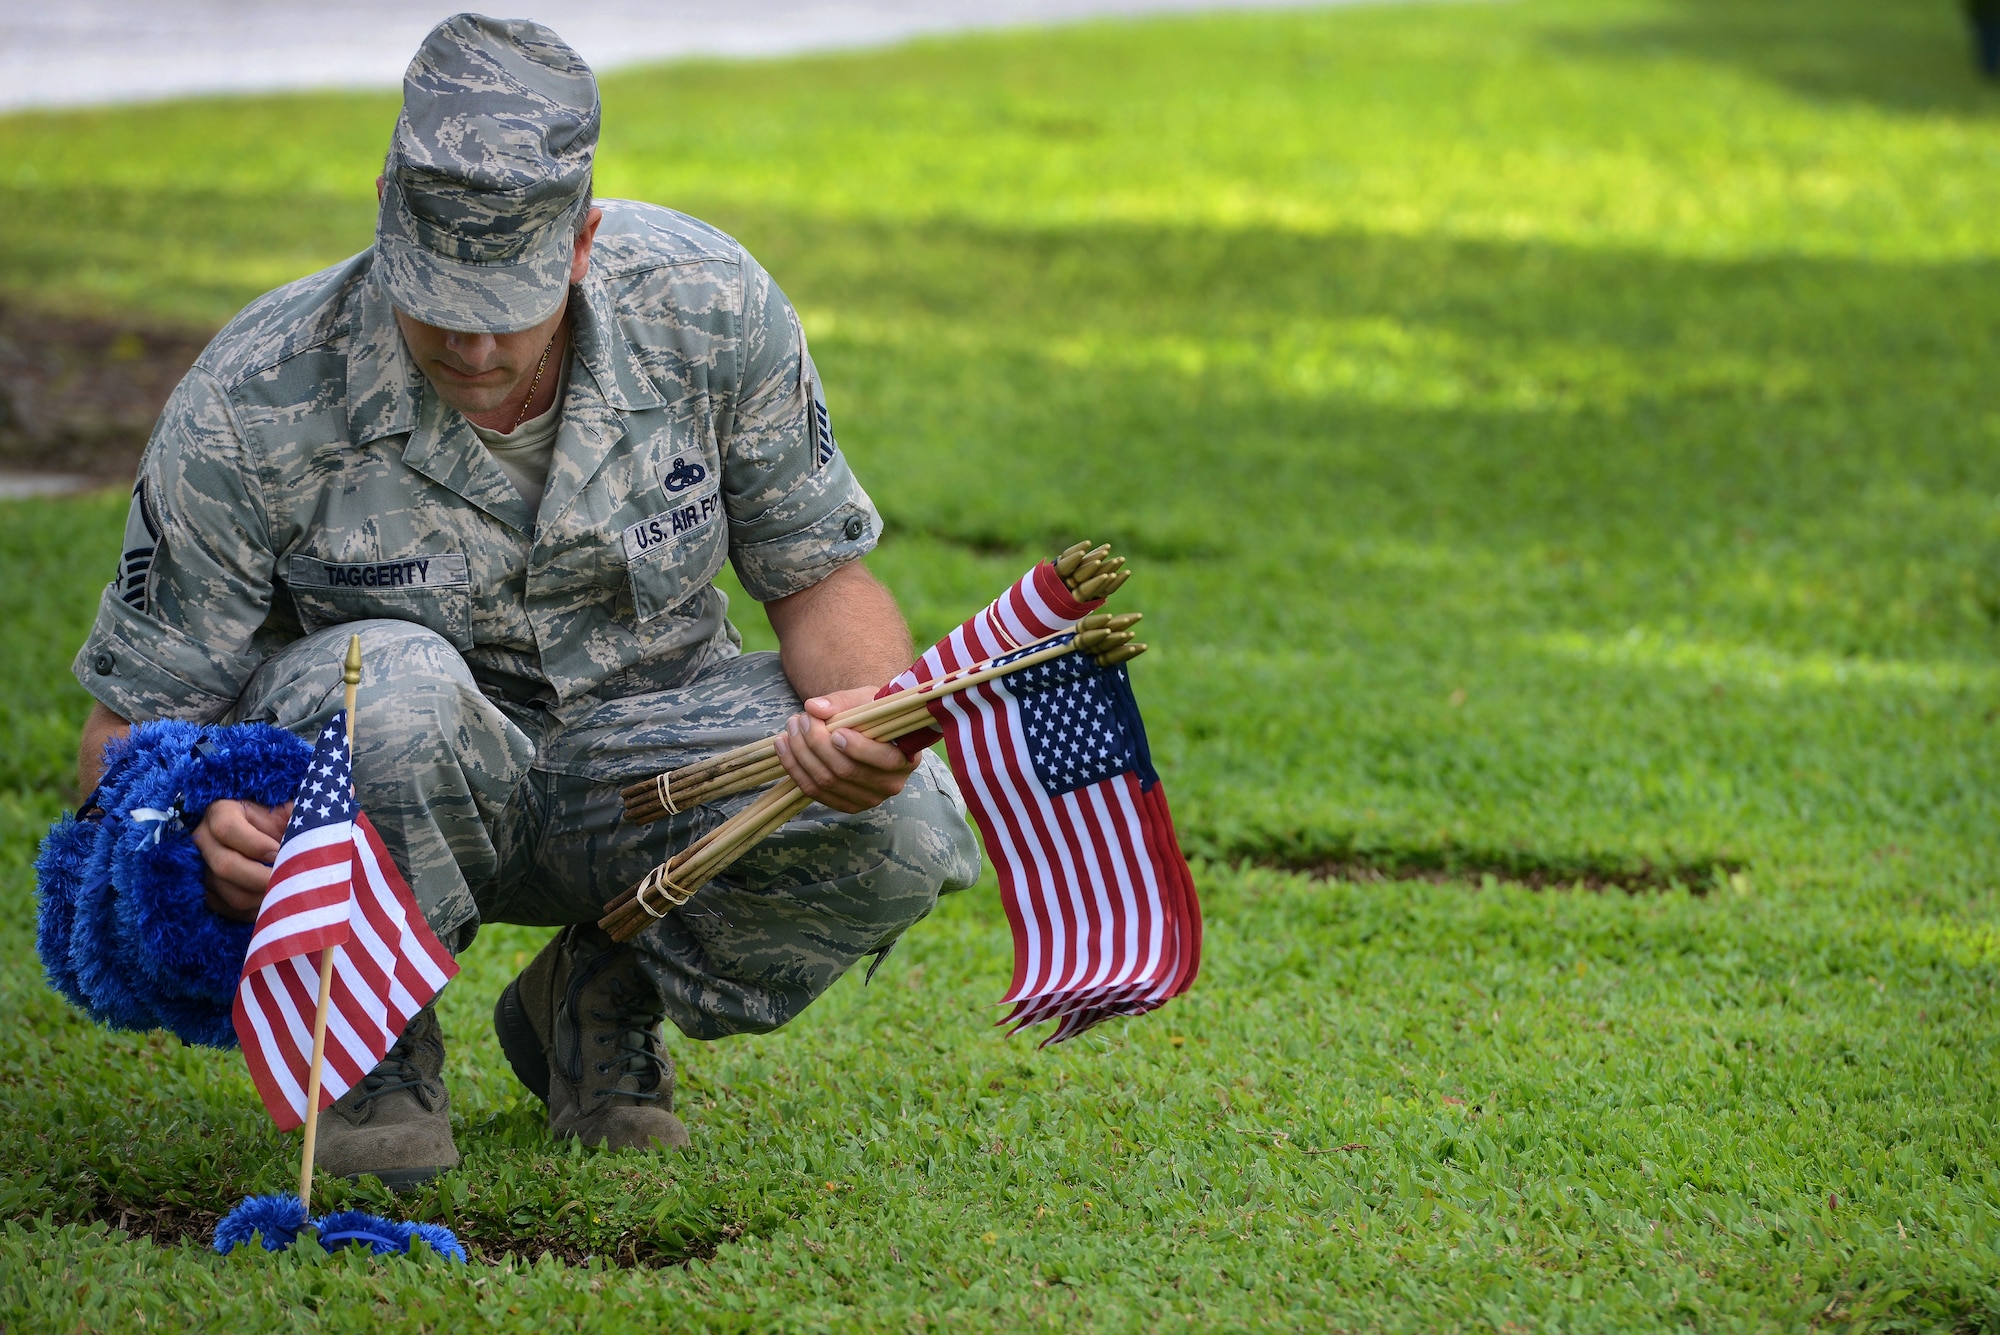 Master Sgt. Kevin Taggerty, 735th Aircraft Maintenance Squadron aircraft maintenance unit NCOIC, places a flag and a lei at the gravesite of an Army Air Forces Airman killed at Hickam Field, Dec. 7, 1941, at the National Memorial Cemetery of the Pacific at Punchbowl on Dec. 2, 2012. Ten volunteers used a roster to identify the locations at the cemetery and placed 92 flags. His daughter Ryah, 14, was part of a group of teenagers who started this project last year. (U.S. Air Force photo/Staff Sgt. Mike Meares)